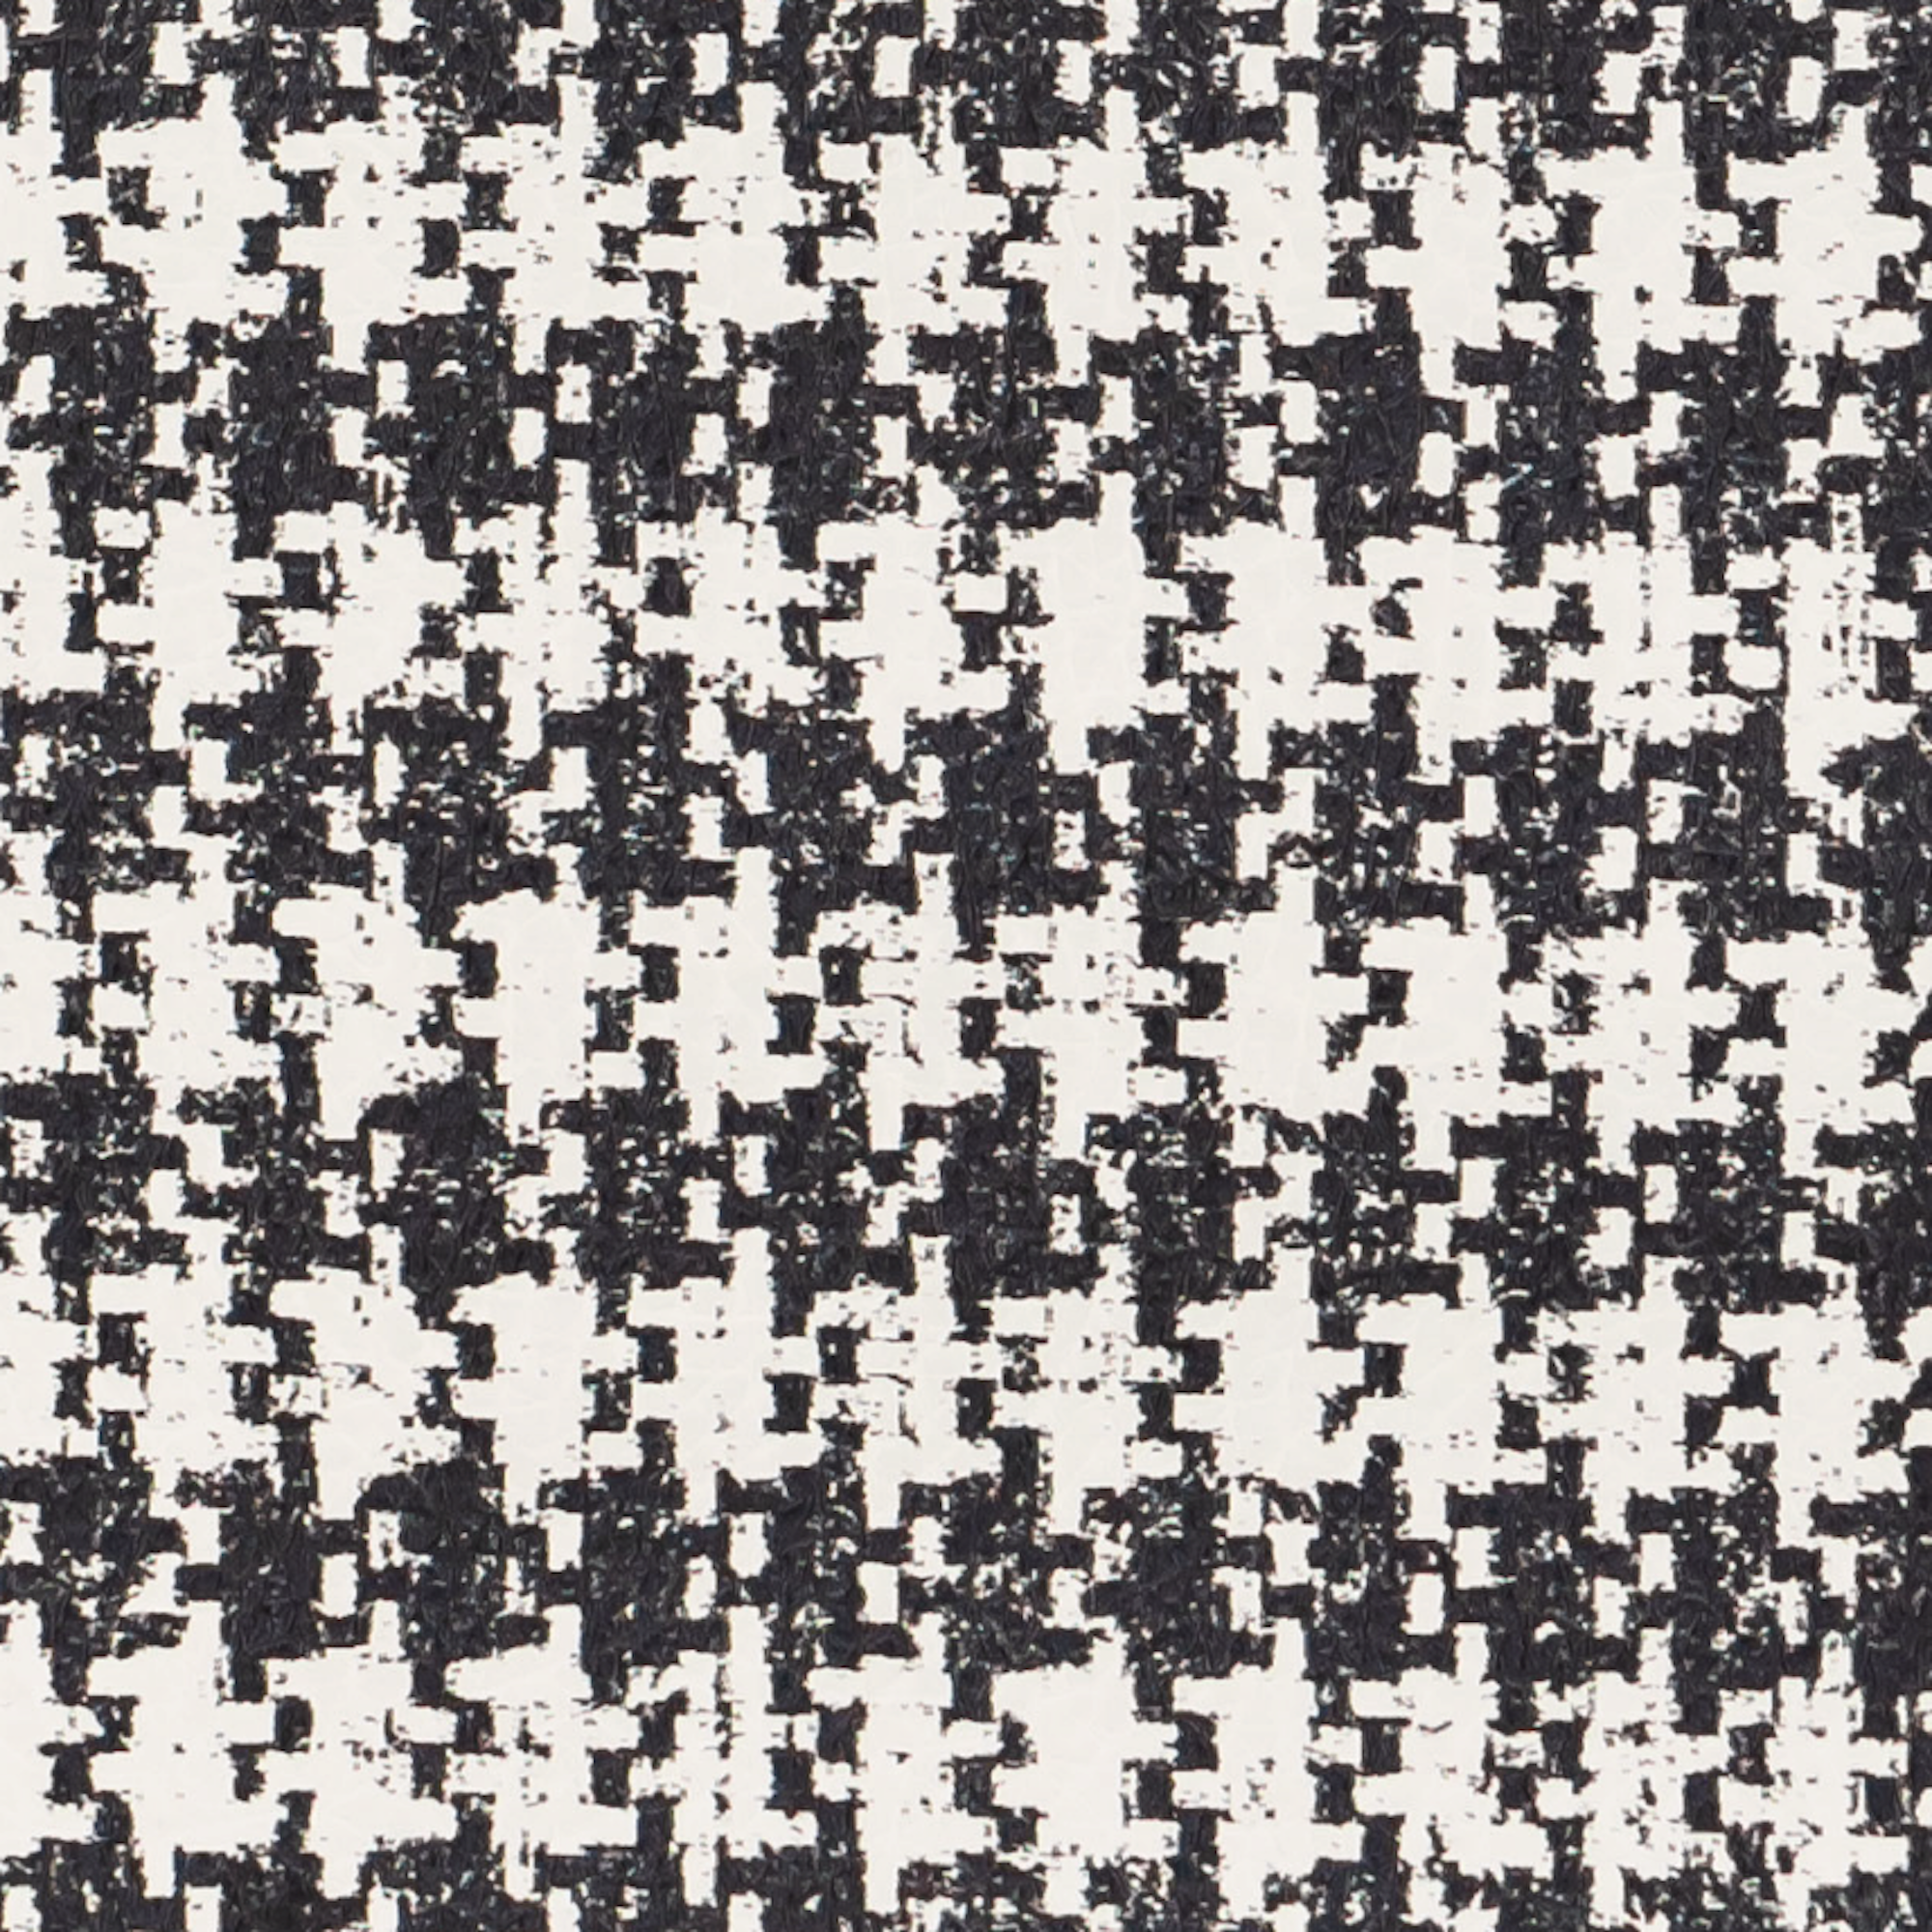 Houndstooth@houndstooth swatch